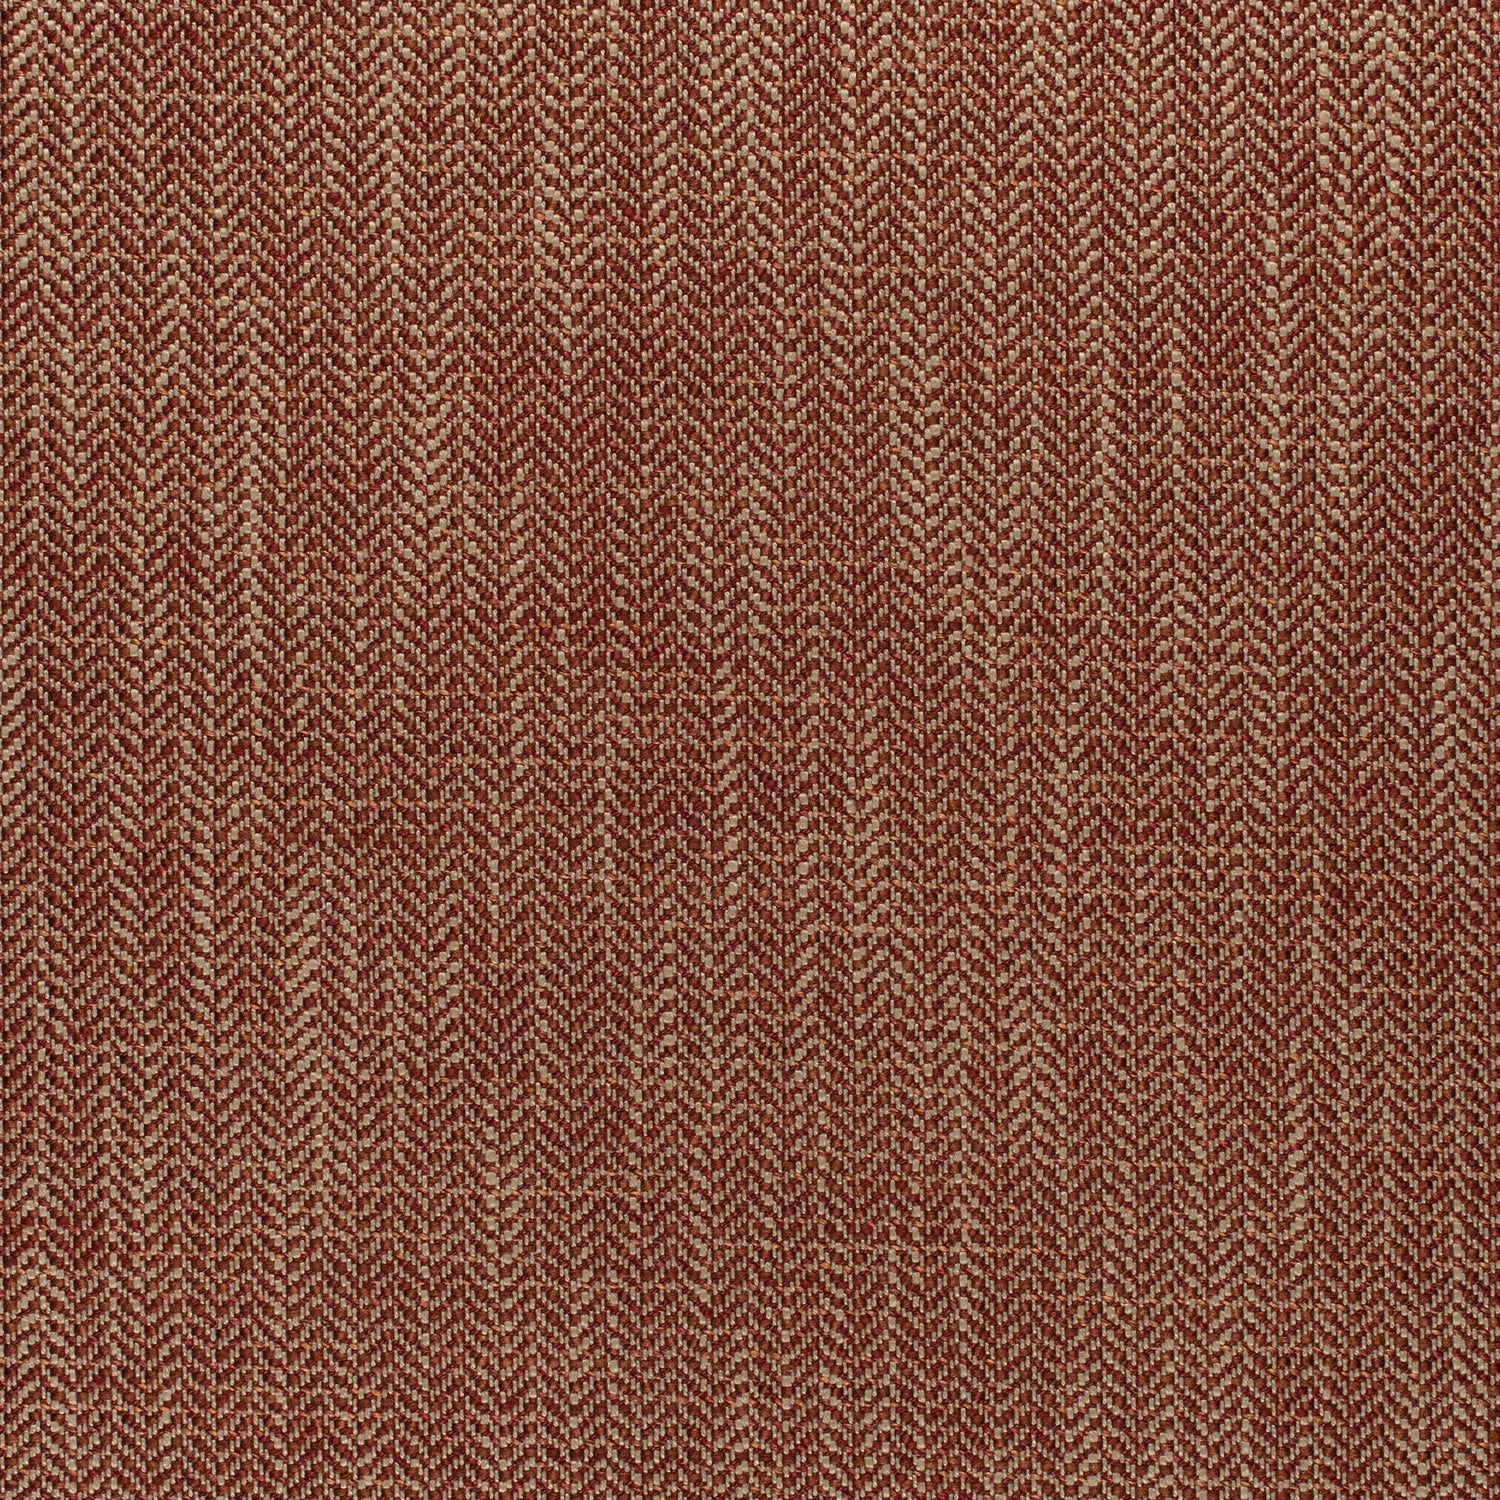 Ashbourne Tweed fabric in russet color - pattern number W80616 - by Thibaut in the Pinnacle collection